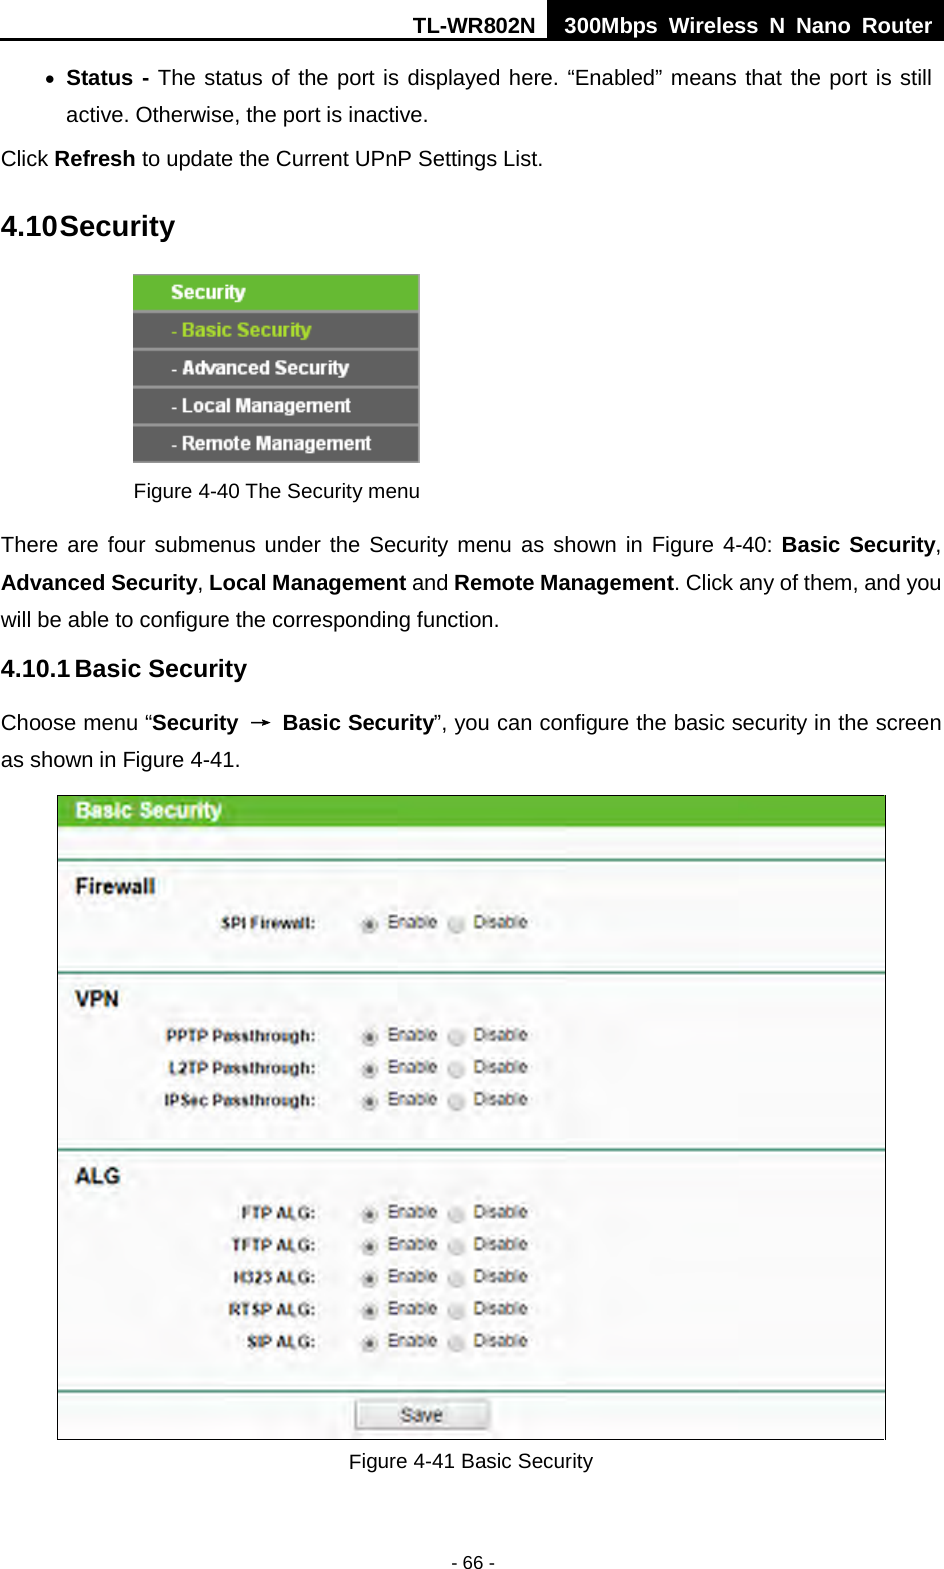 TL-WR802N  300Mbps Wireless N Nano Router  • Status - The status of the port is displayed here. “Enabled” means that the port is still active. Otherwise, the port is inactive. Click Refresh to update the Current UPnP Settings List.   4.10 Security  Figure 4-40 The Security menu There are four submenus under the Security menu as shown in Figure 4-40: Basic Security, Advanced Security, Local Management and Remote Management. Click any of them, and you will be able to configure the corresponding function. 4.10.1 Basic Security Choose menu “Security  → Basic Security”, you can configure the basic security in the screen as shown in Figure 4-41.  Figure 4-41 Basic Security - 66 - 